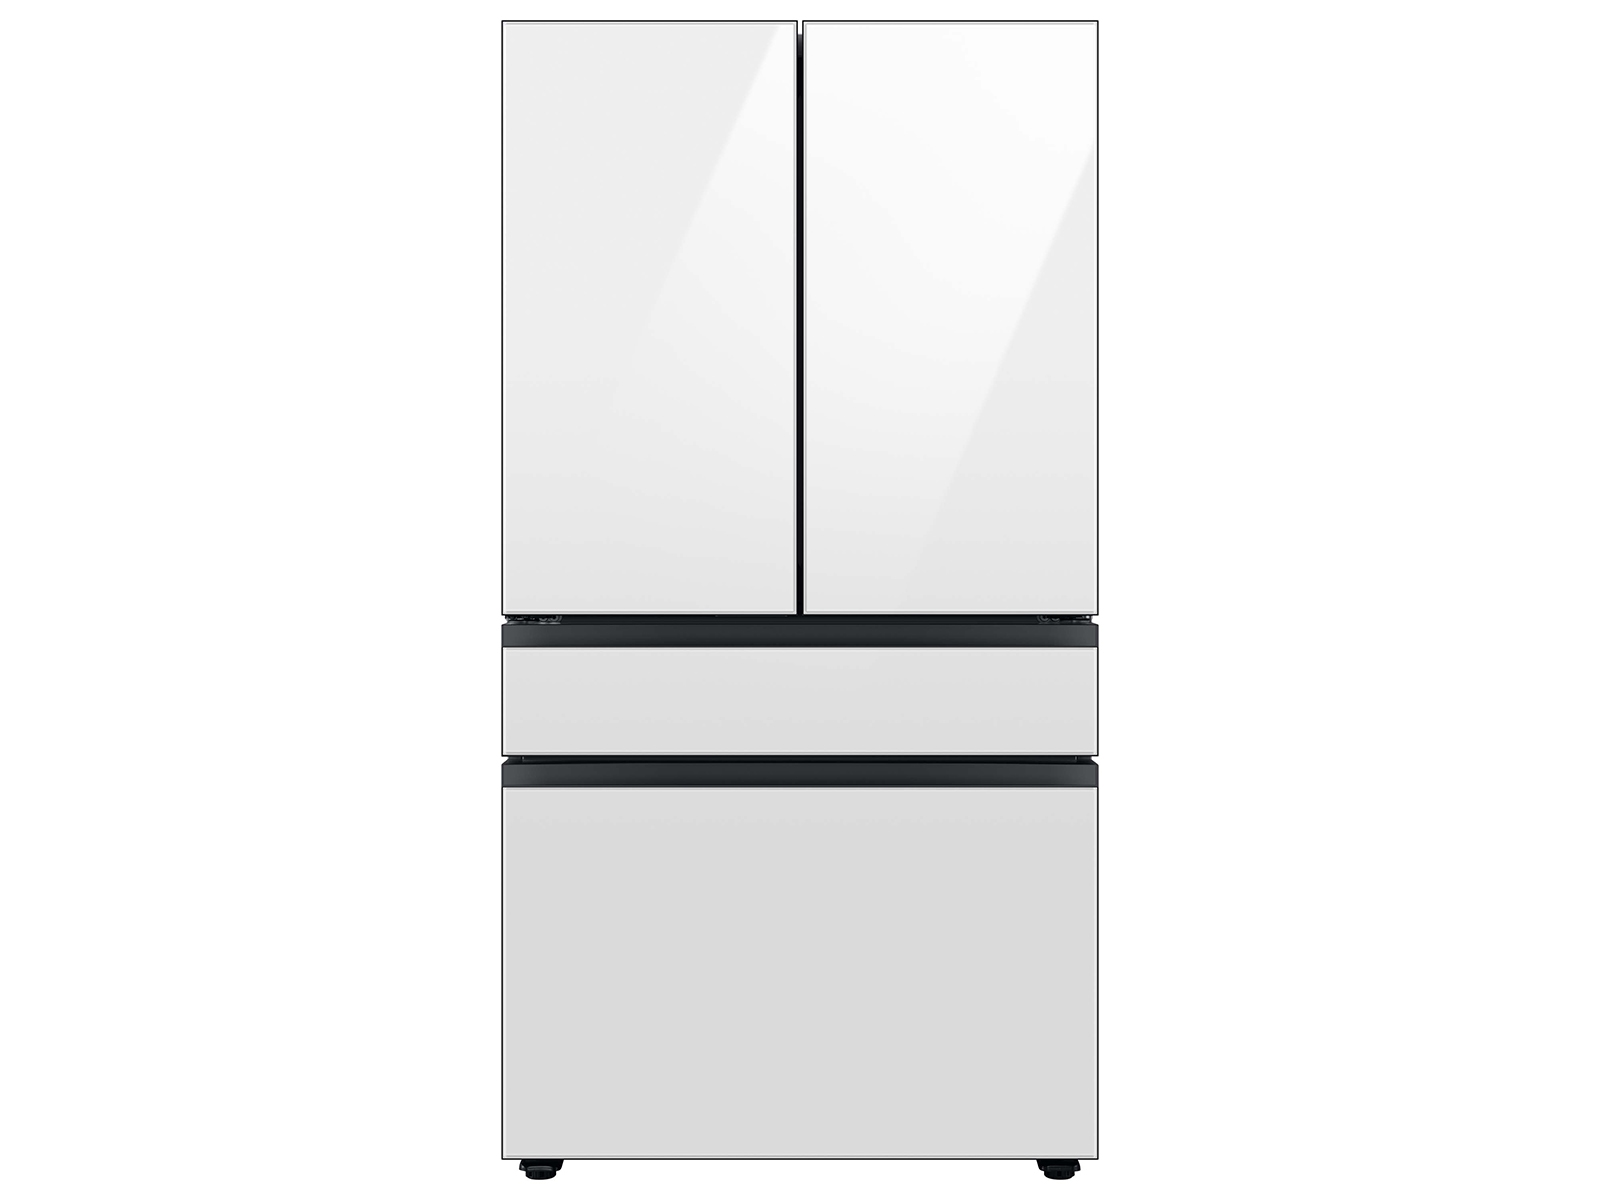 RF29BB8200QLAA Samsung Appliances Bespoke 4-Door French Door Refrigerator  (29 cu. ft.) with AutoFill Water Pitcher in Stainless Steel STAINLESS STEEL  - Jetson TV & Appliance